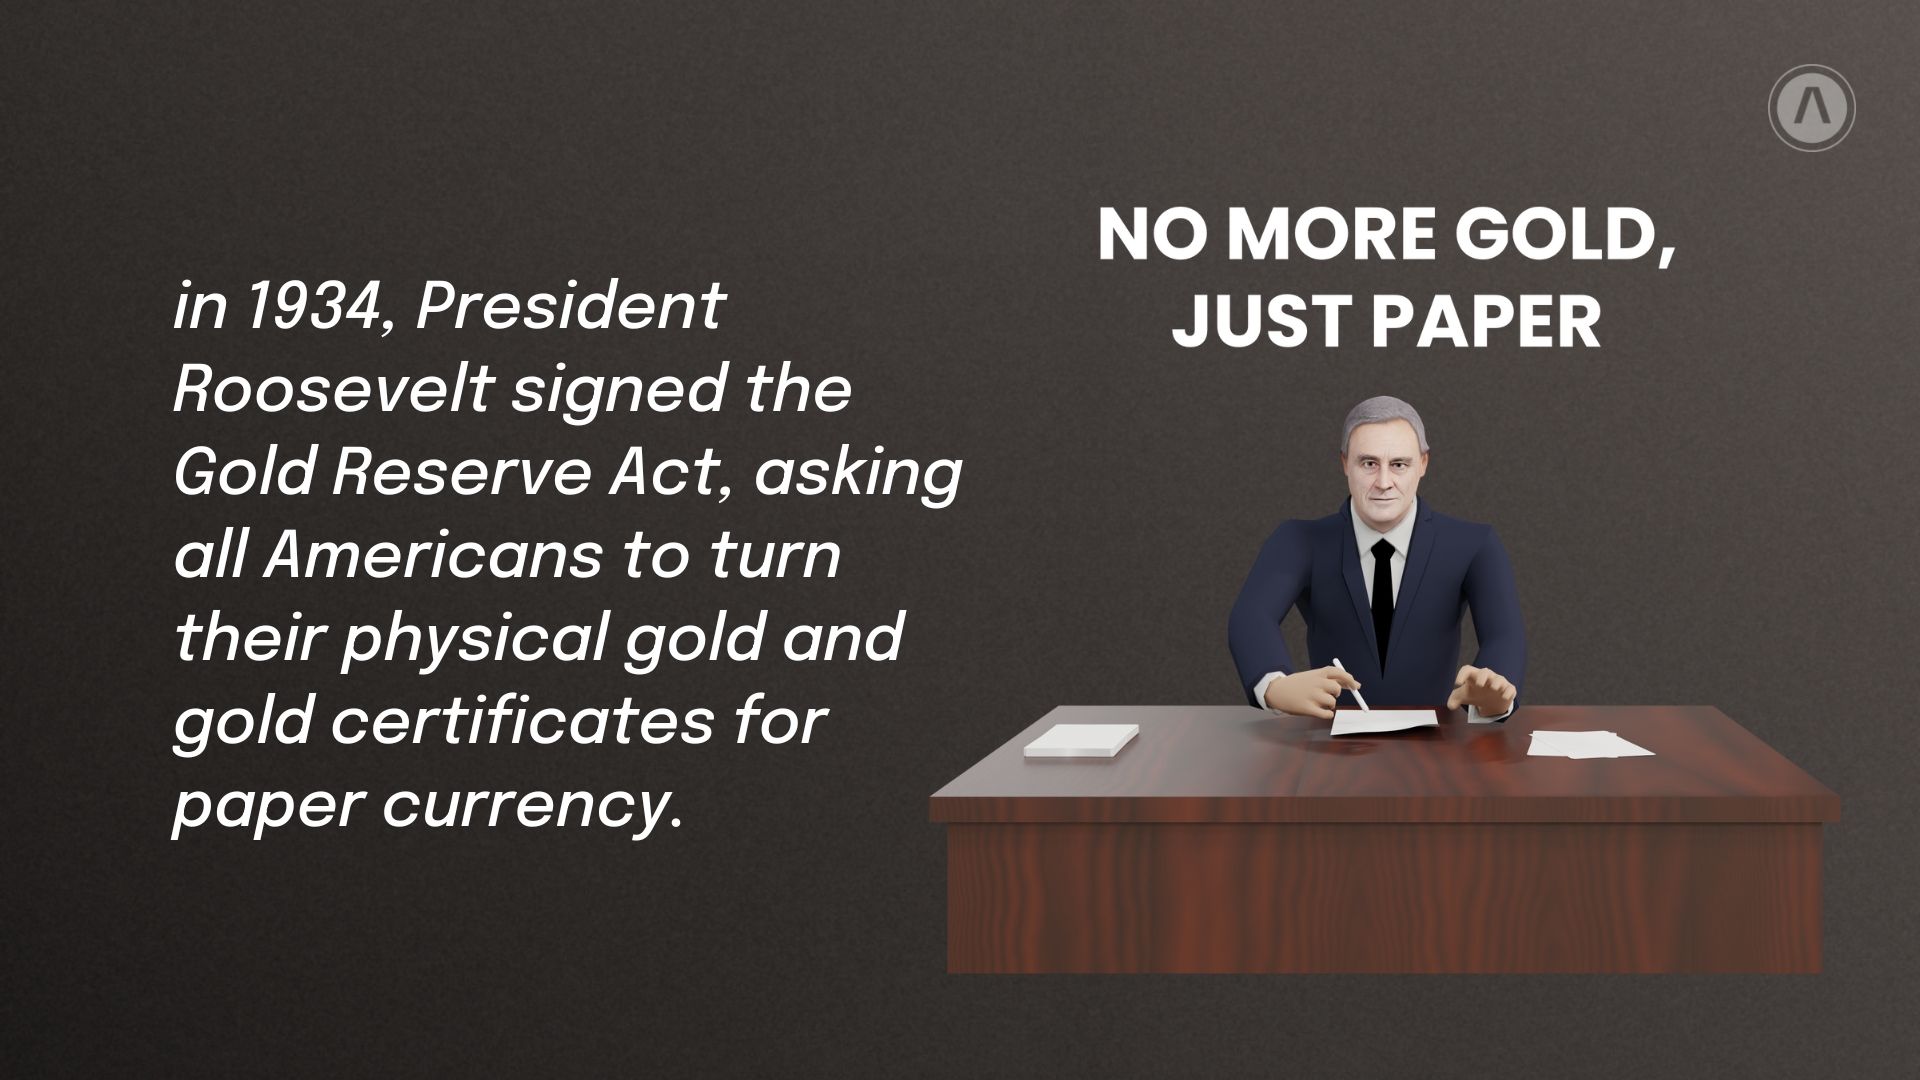 2. in 1934, President Roosevelt asked all American citizens to turn in their gold certificates for paper currency or silver coins, ending the gold coin and certificate era.jpg